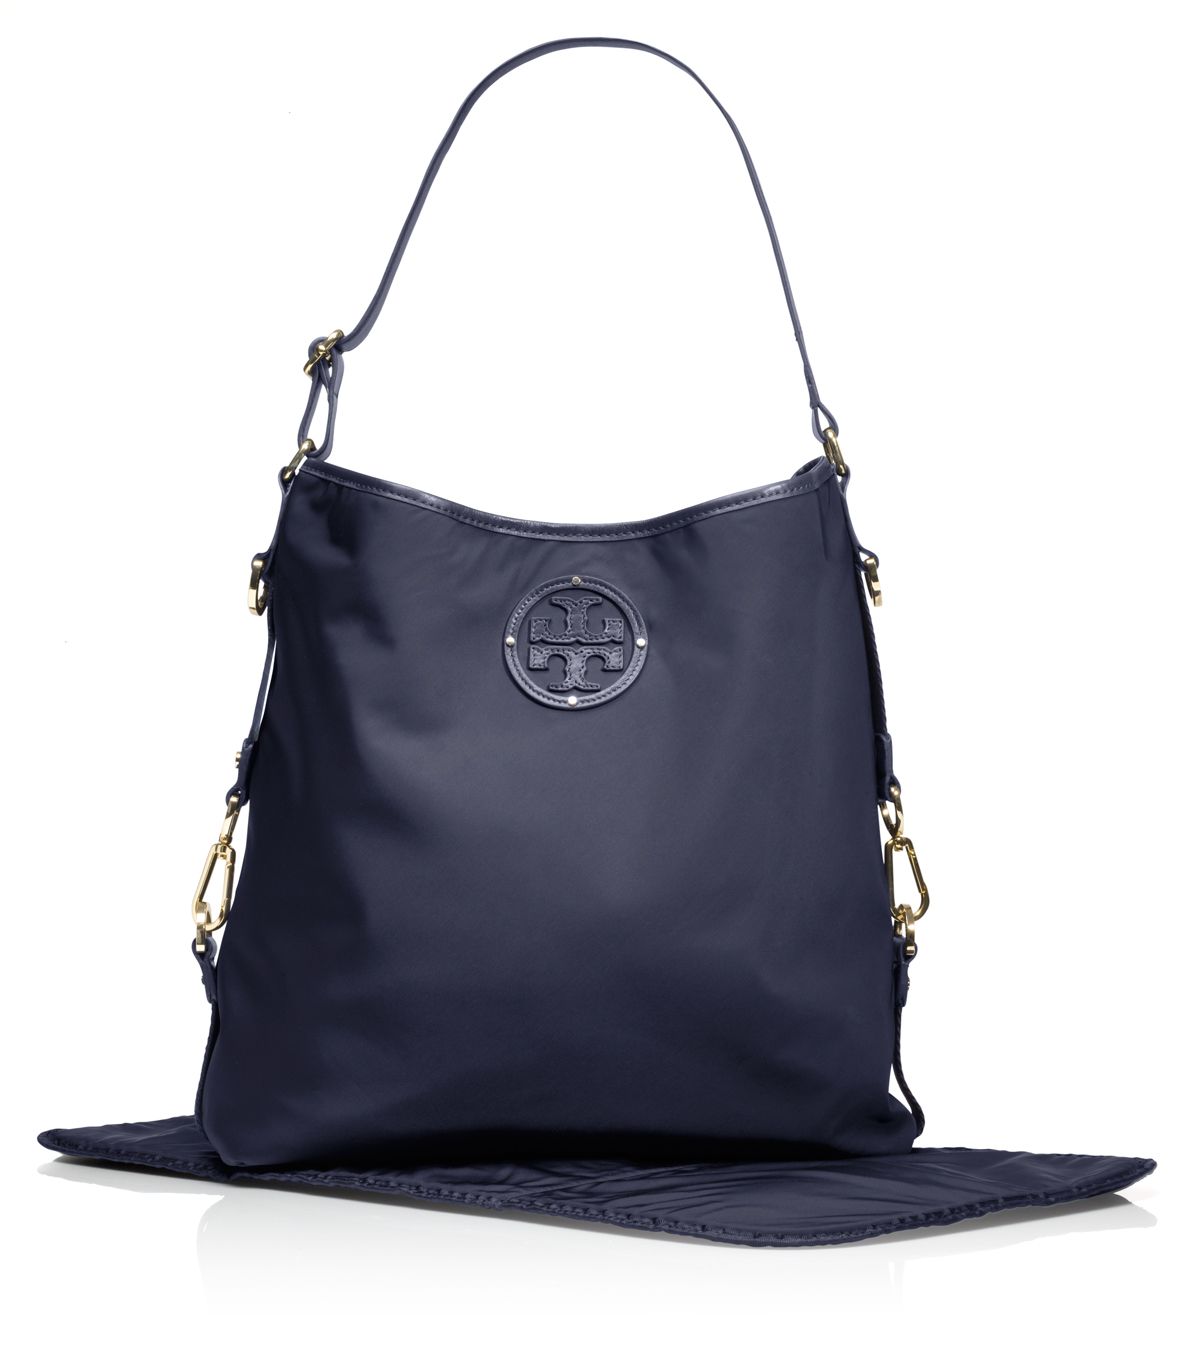 Tory Burch Stacked Logo Baby Bag in Blue - Lyst